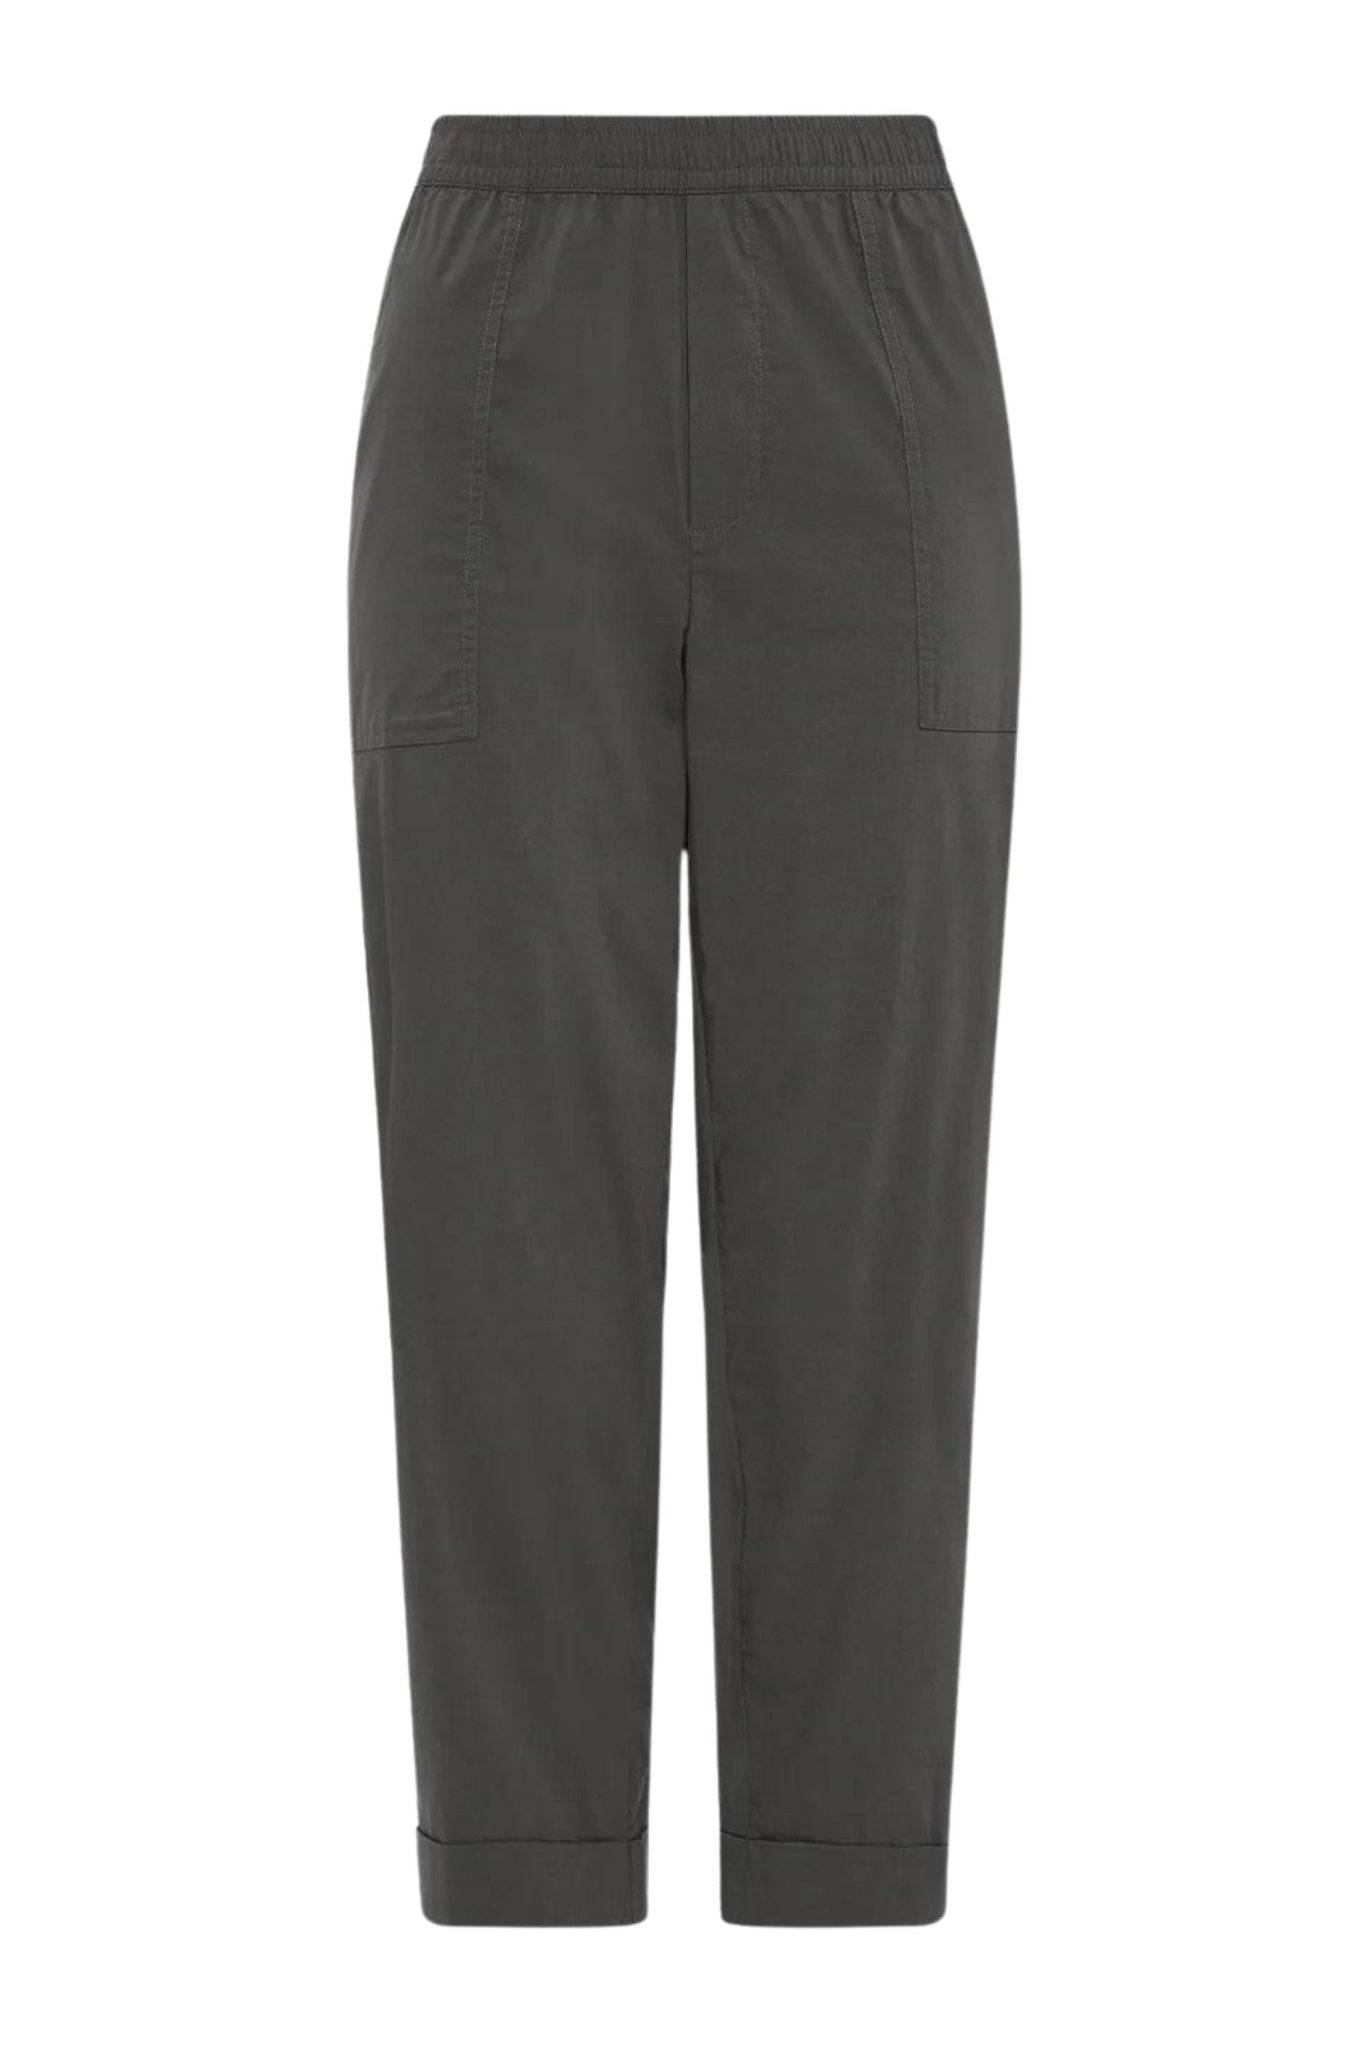 Stay stylish and comfortable with these versatile 7/8 pants